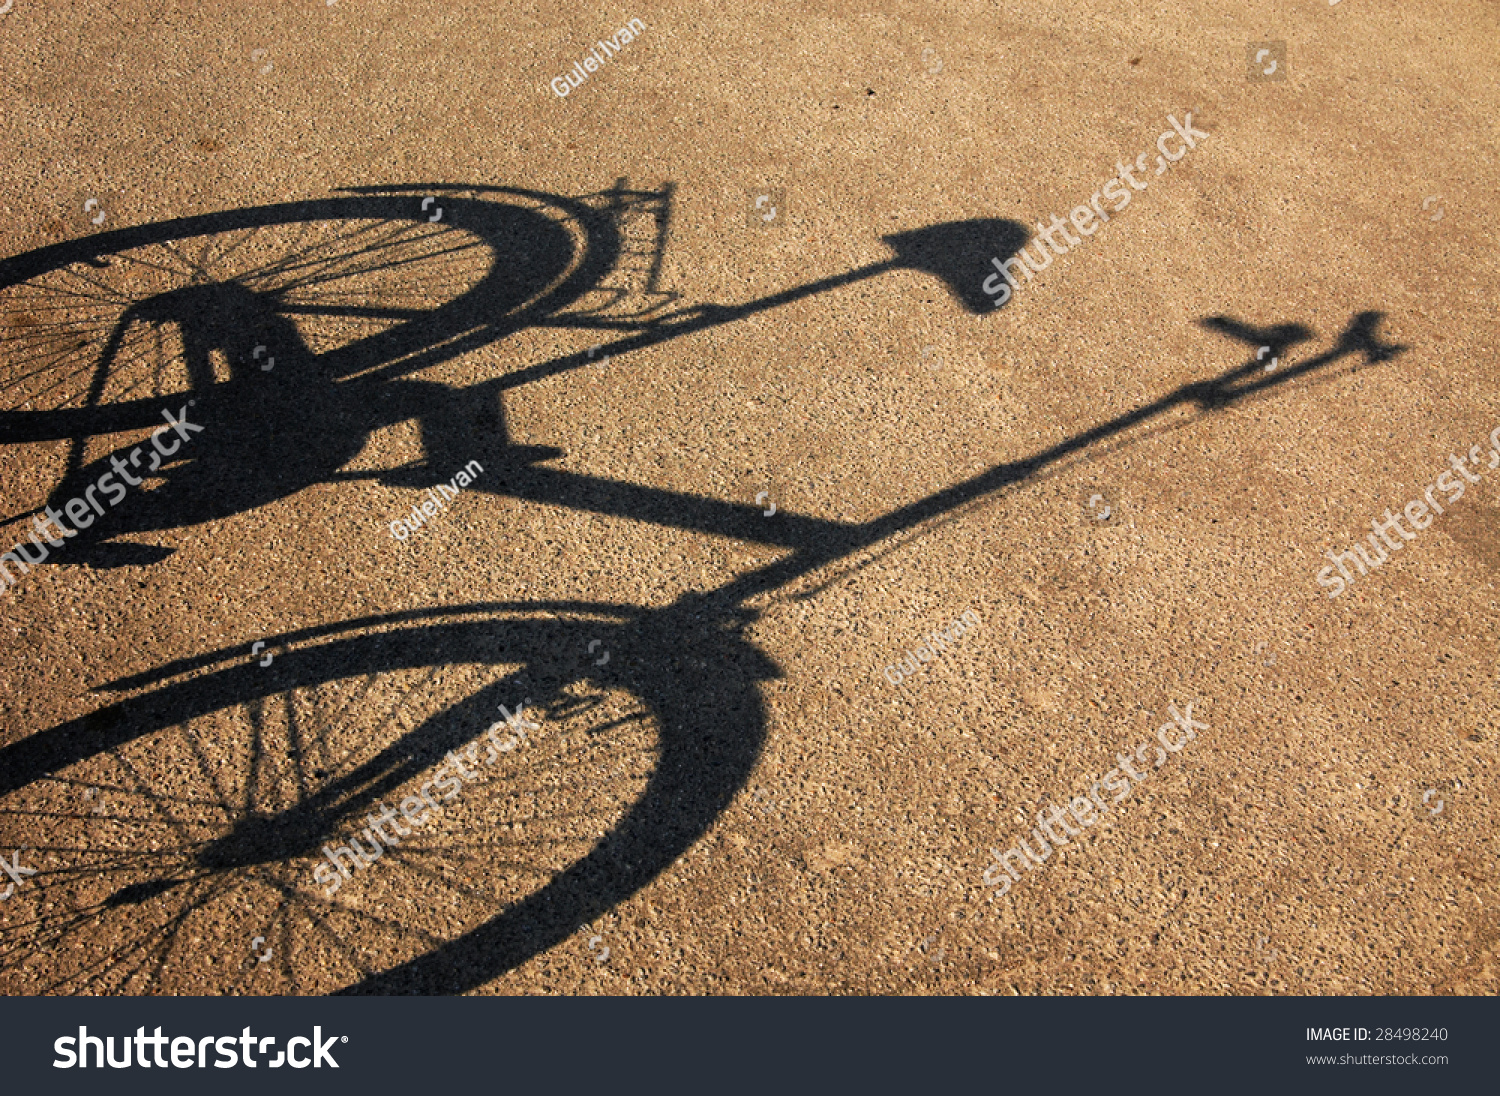 Shade of a bicycle on a cracked asphalt. #28498240